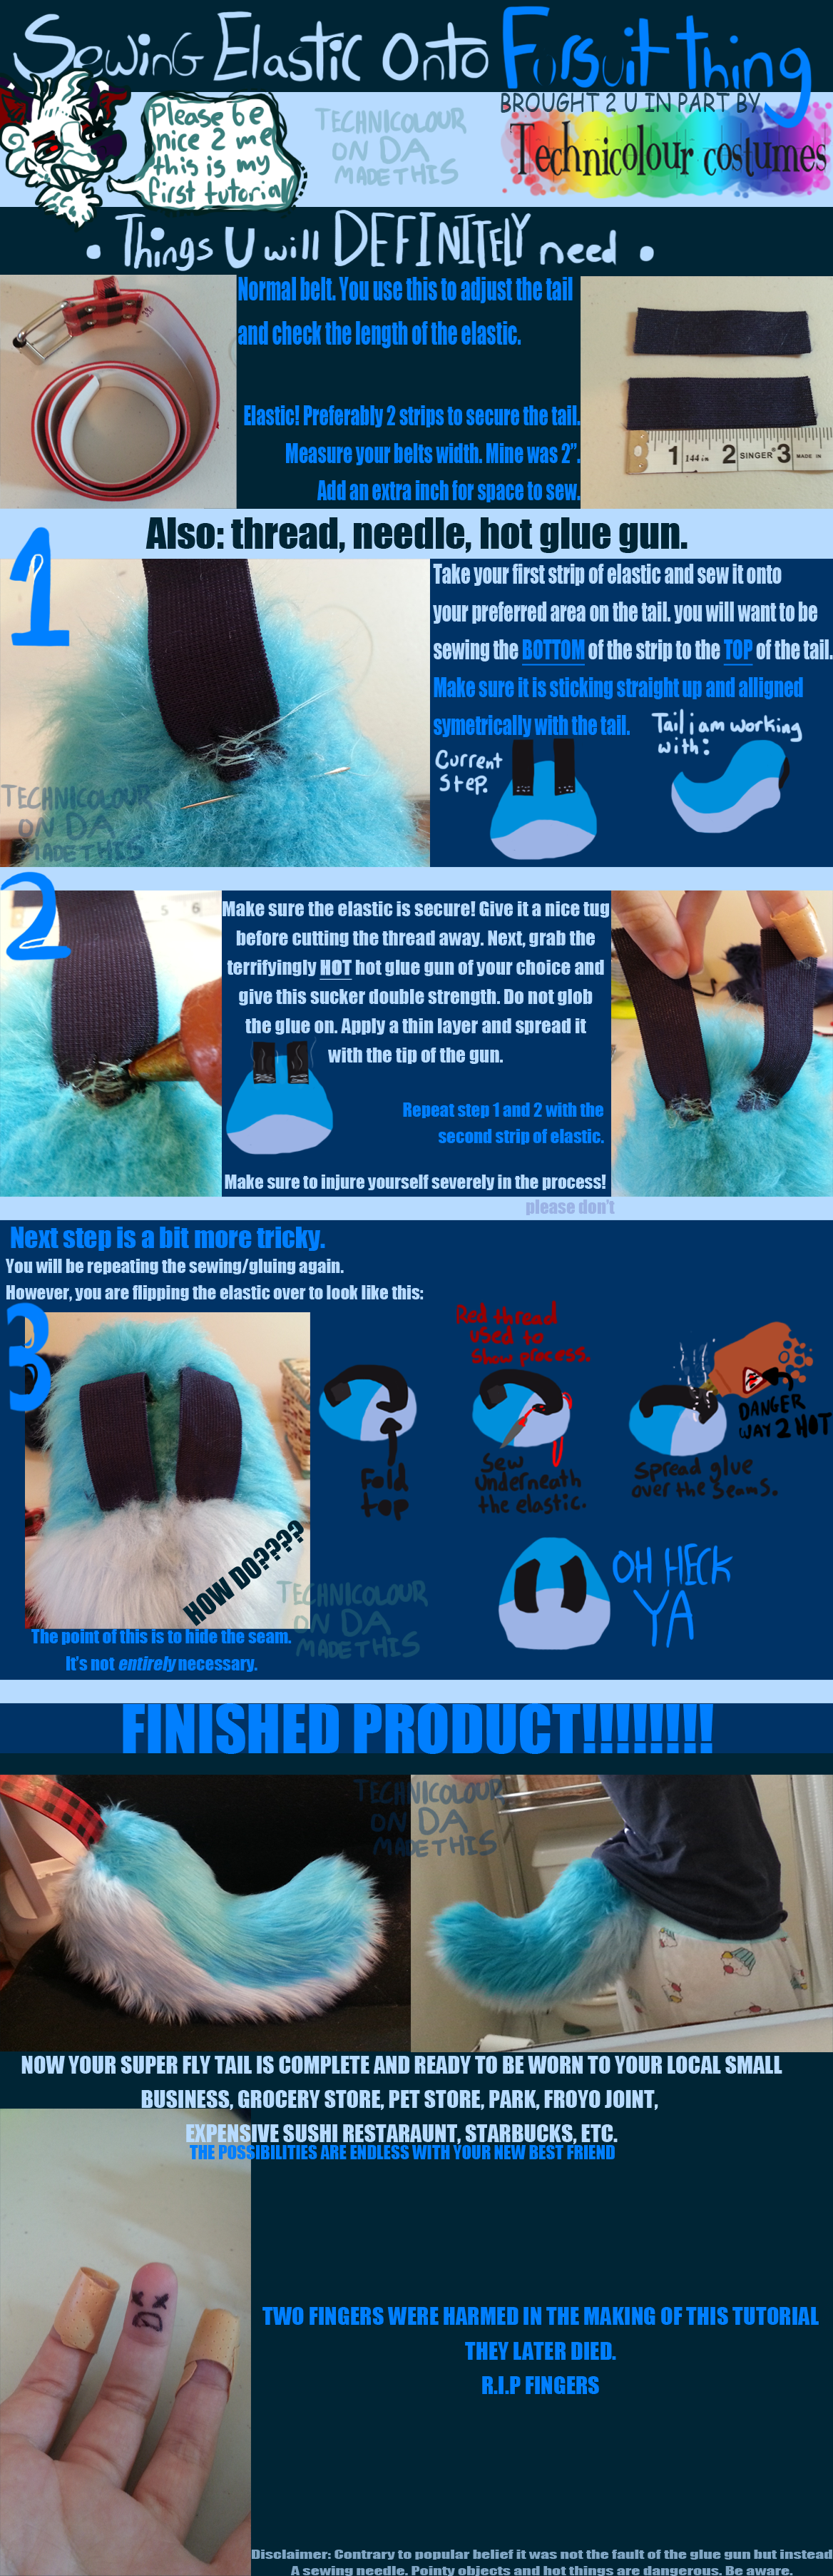 FURSUIT TUTORIAL: Sewing Elastic Onto Your Tail